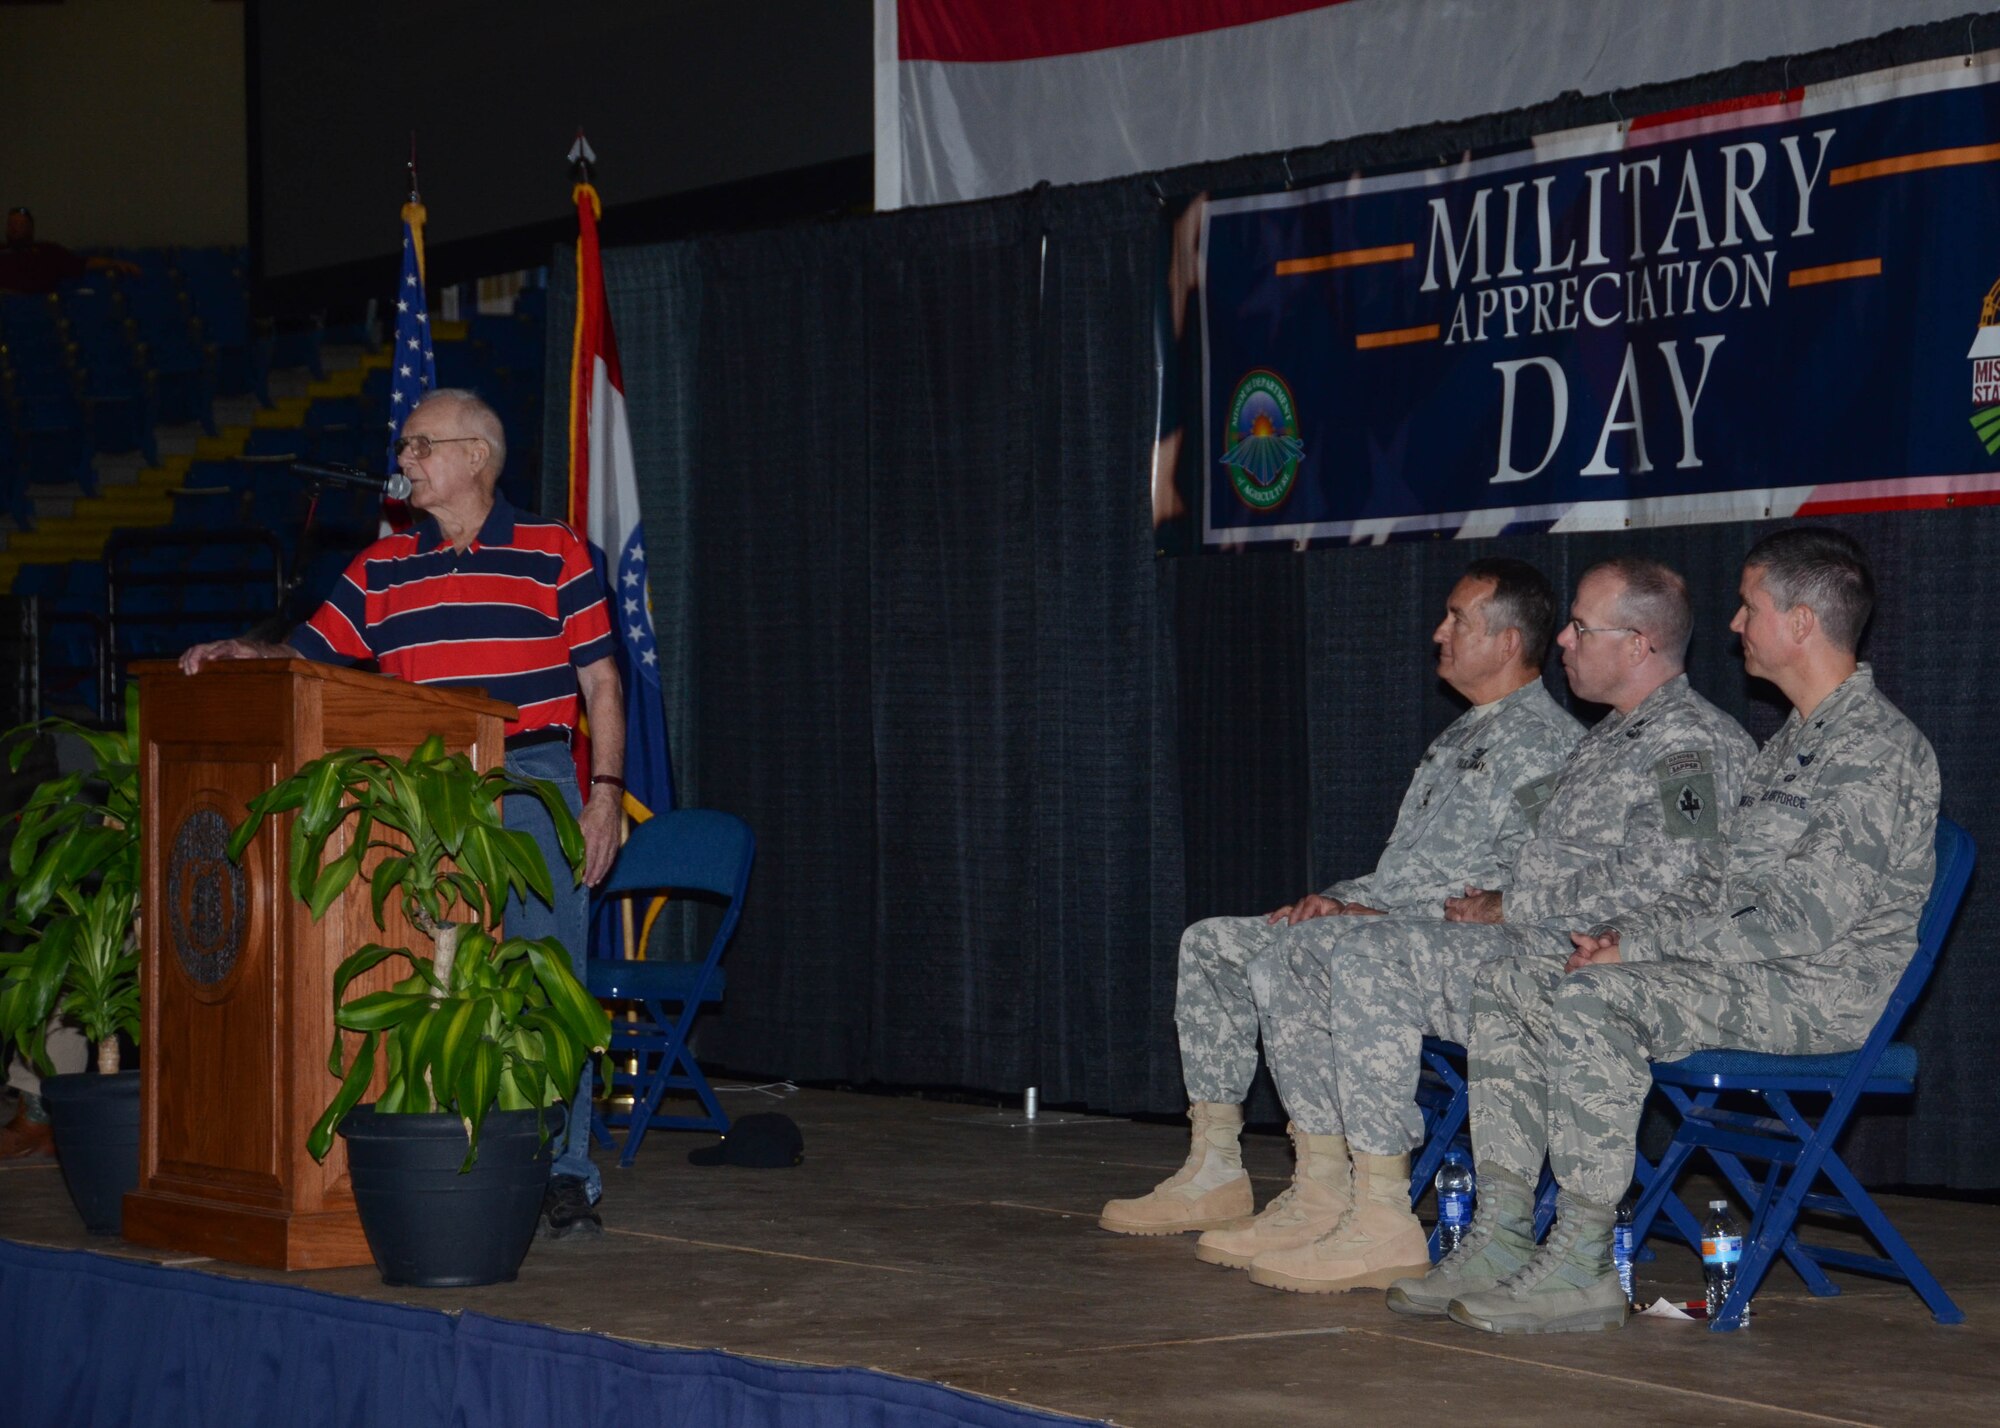 Maj. Gen. Stephen L. Danner, Brig. Gen. James Raymer and Brig. Gen. Paul W. Tibbets IV listen as guest speaker and World War II veteran Dale Mitchell recounts his military career at the Missouri State Fair Military Appreciation Day August 16, 2015. (U.S. Air National Guard photo by Staff Sgt. Brittany Cannon)

